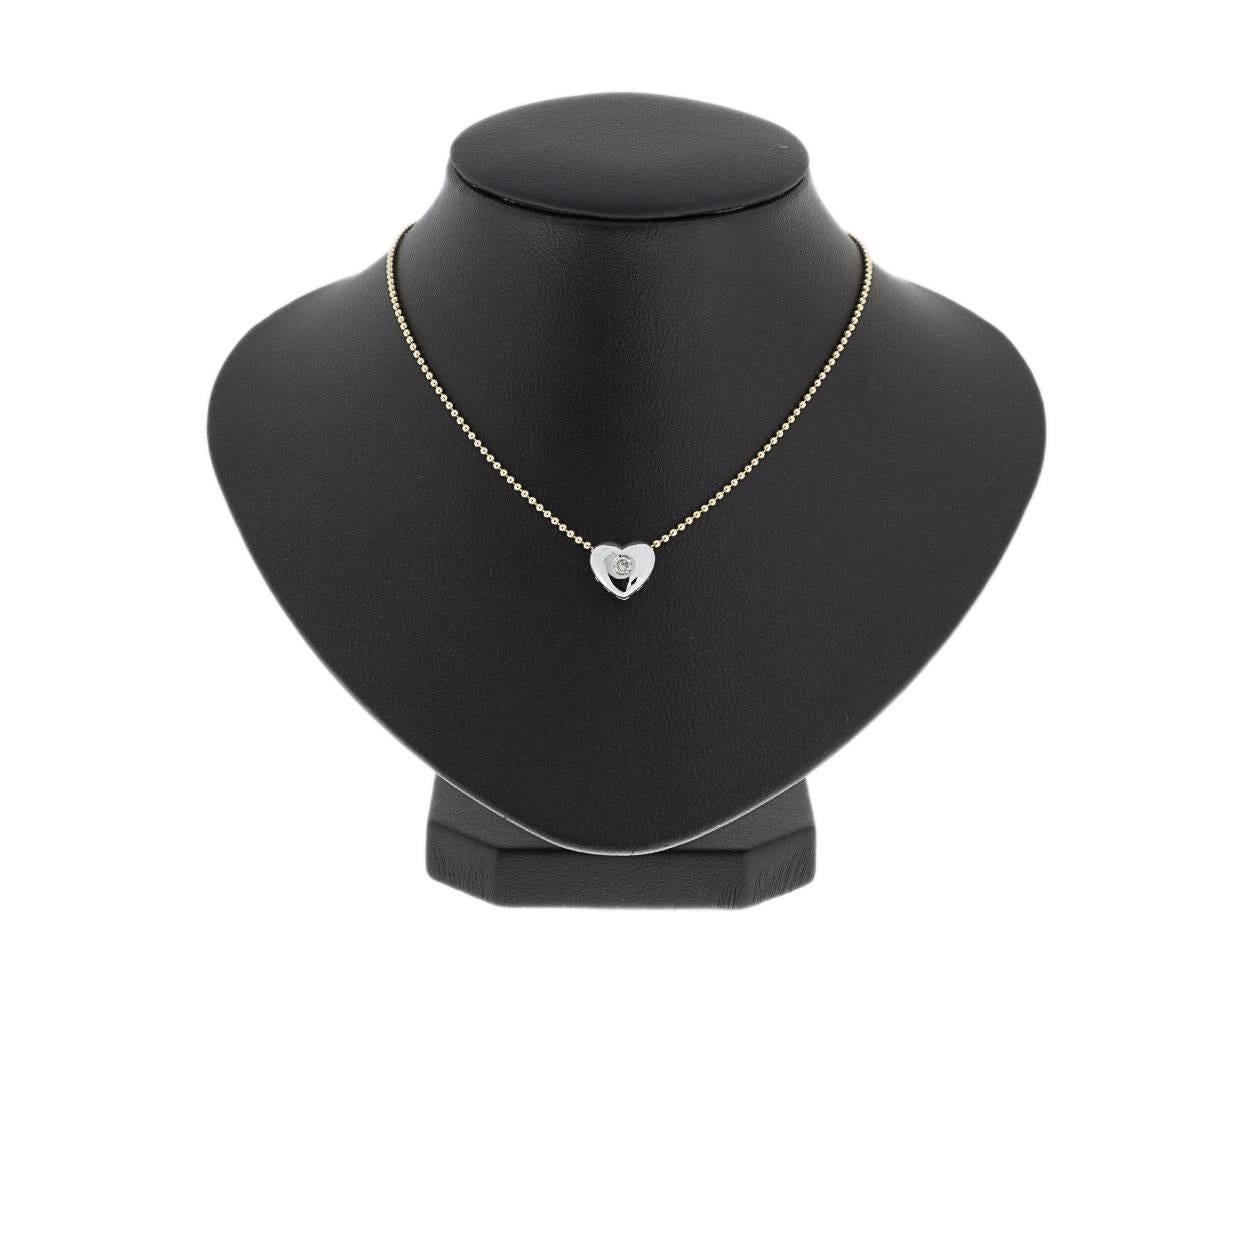 Simple and elegant is the best way to describe this stunning pendant! It features a sparkly round brilliant diamond weighing .15 carat that grades as H/SI2 in quality.  The diamond is set in a heart-shaped white gold pendant, which is on a 14k